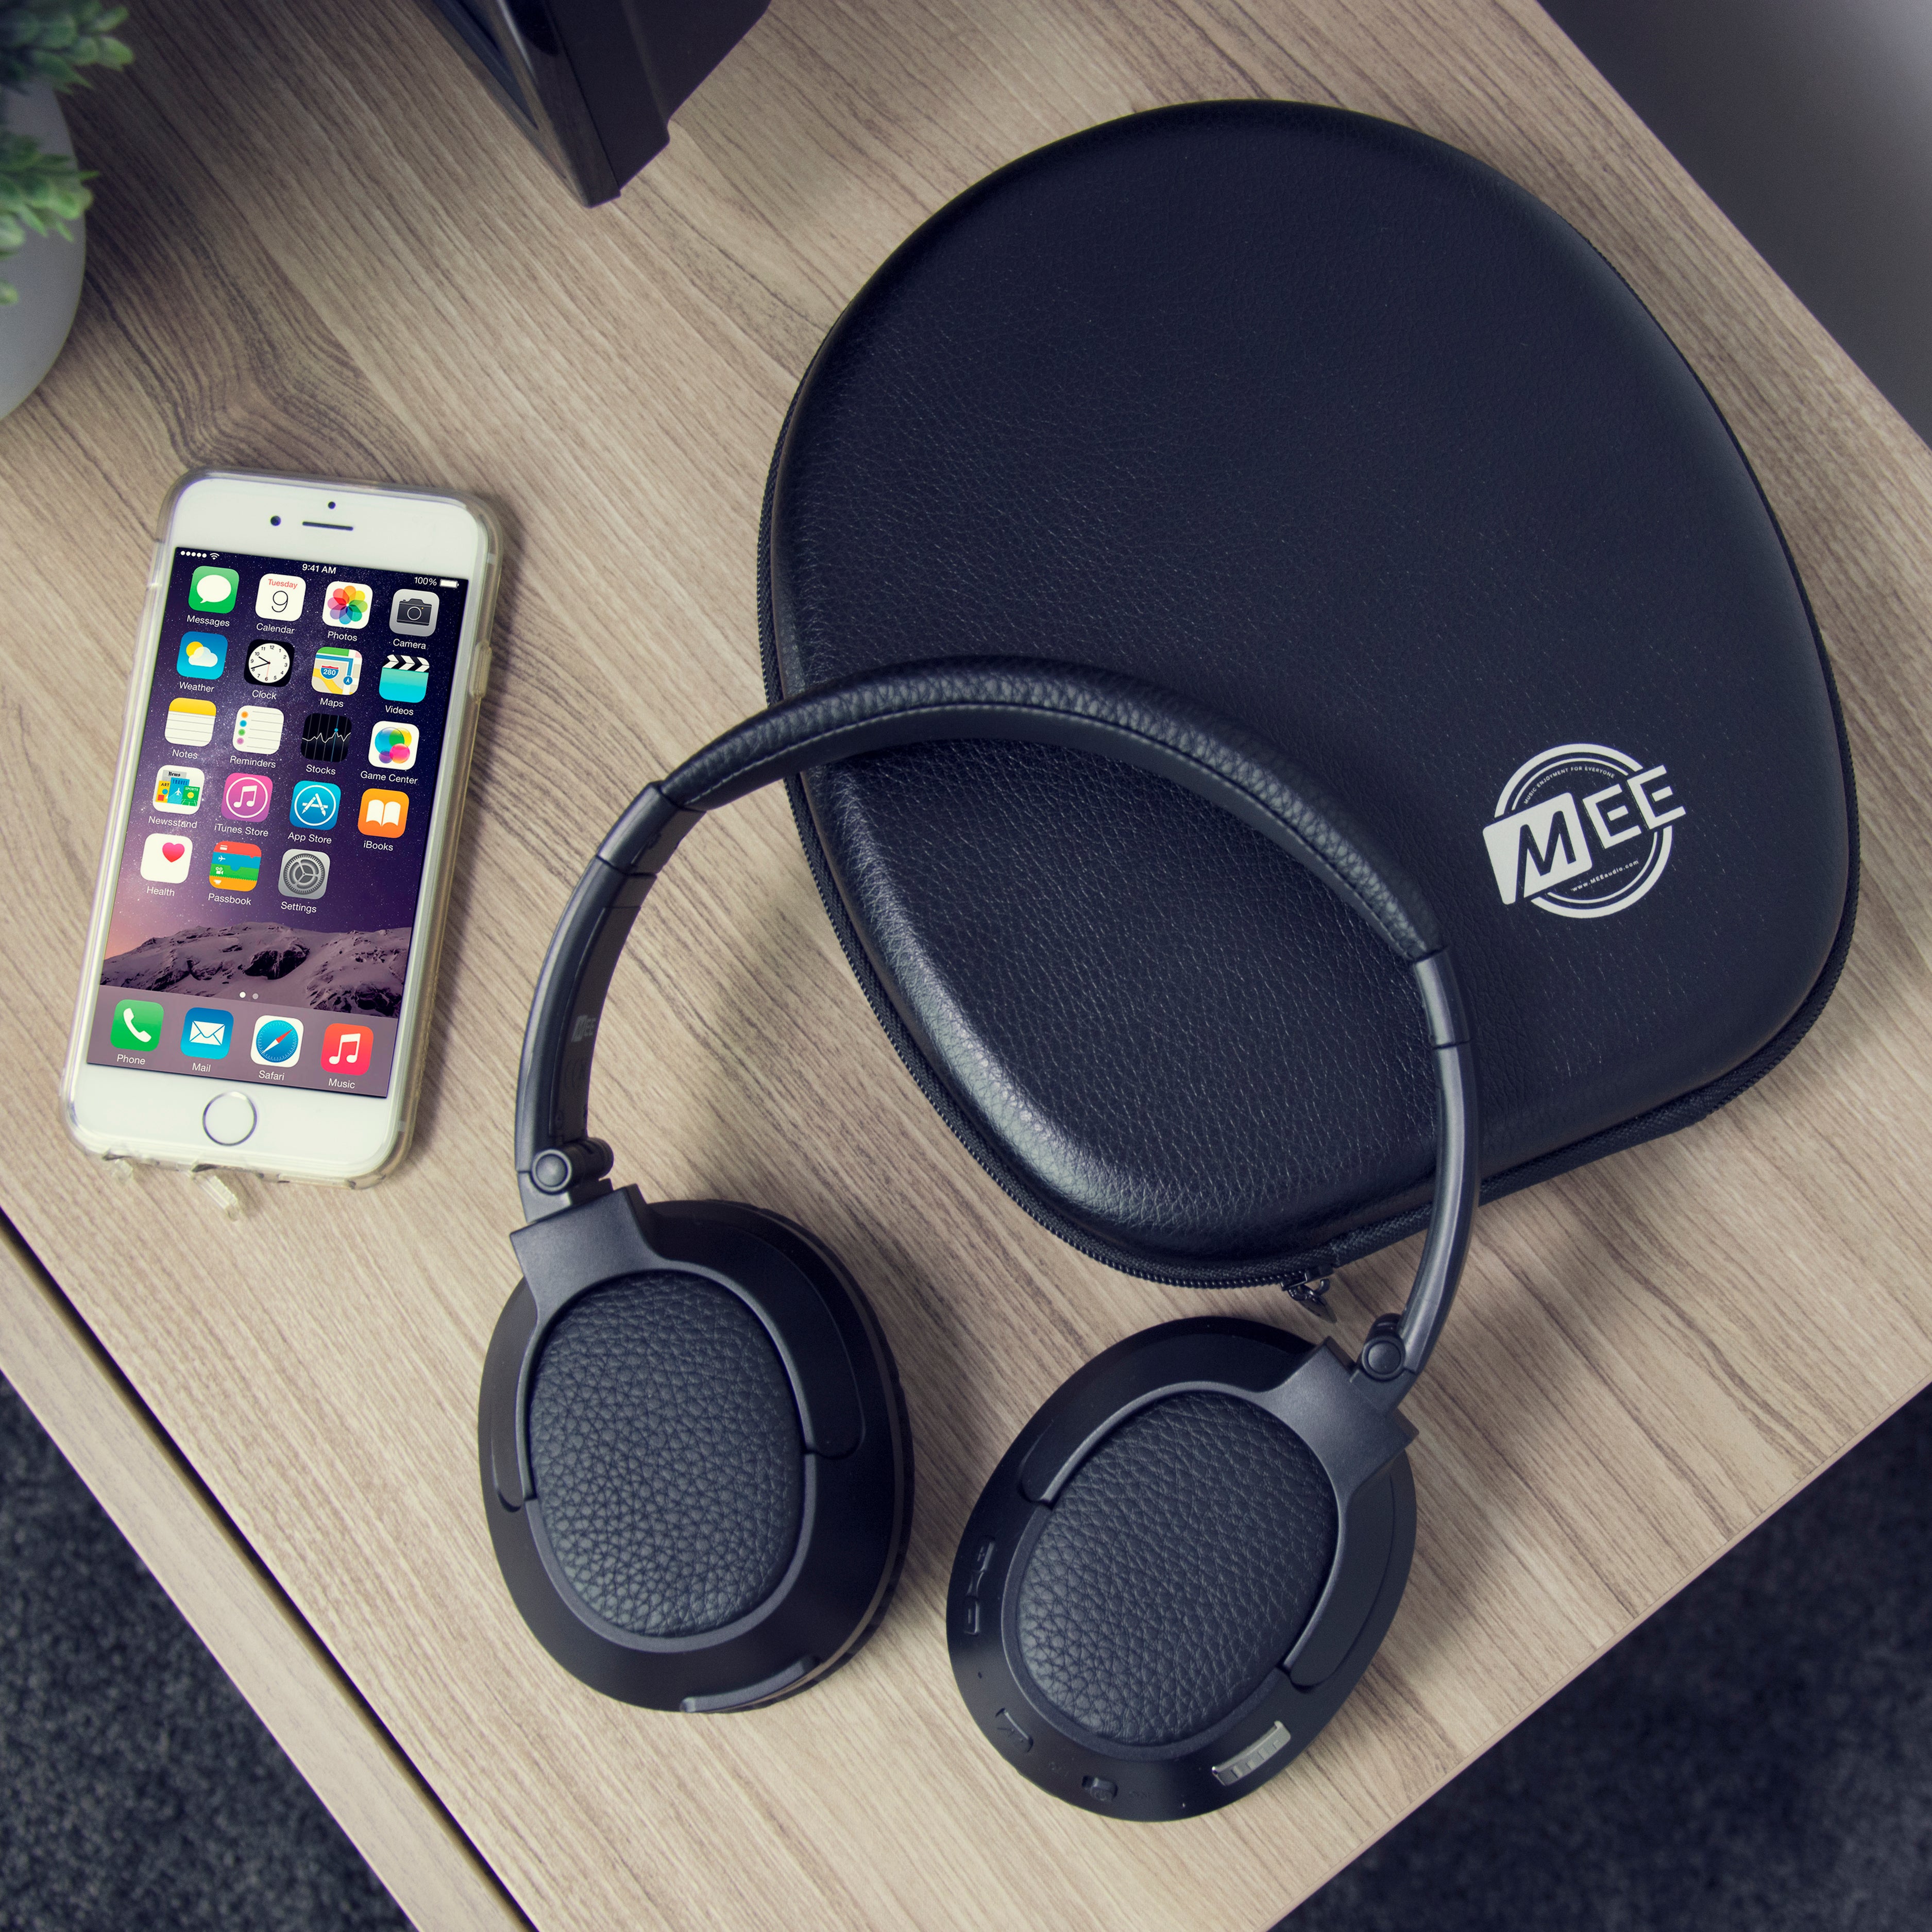 A smartphone displaying colorful app icons lies next to black headphones and a carrying case on a wooden table.